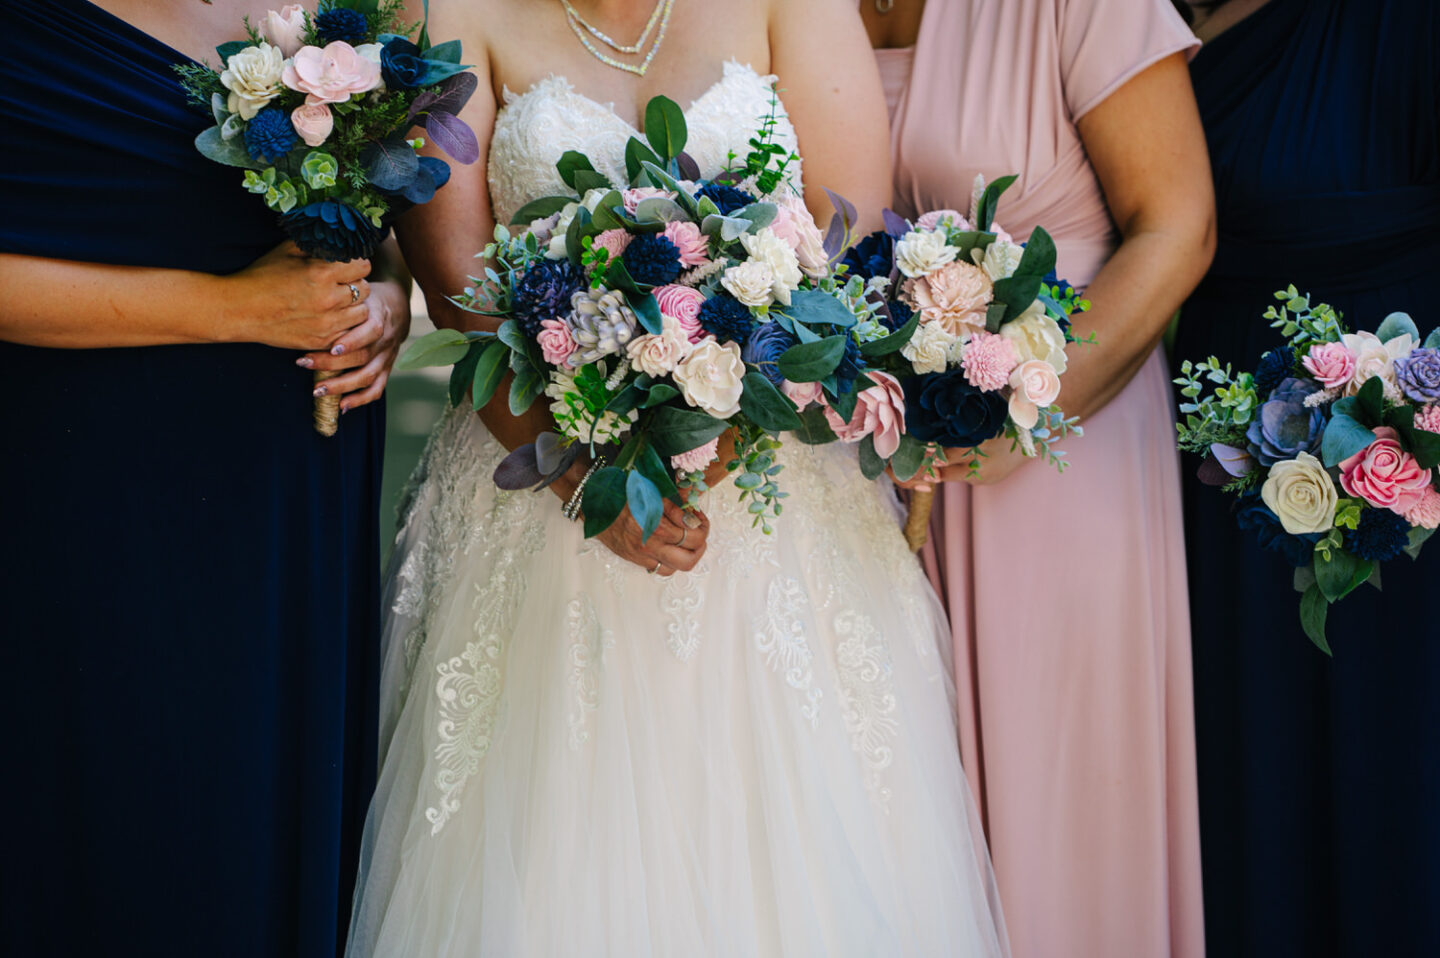 5 Creative Ways to Incorporate “Something Blue” Into Your Wedding